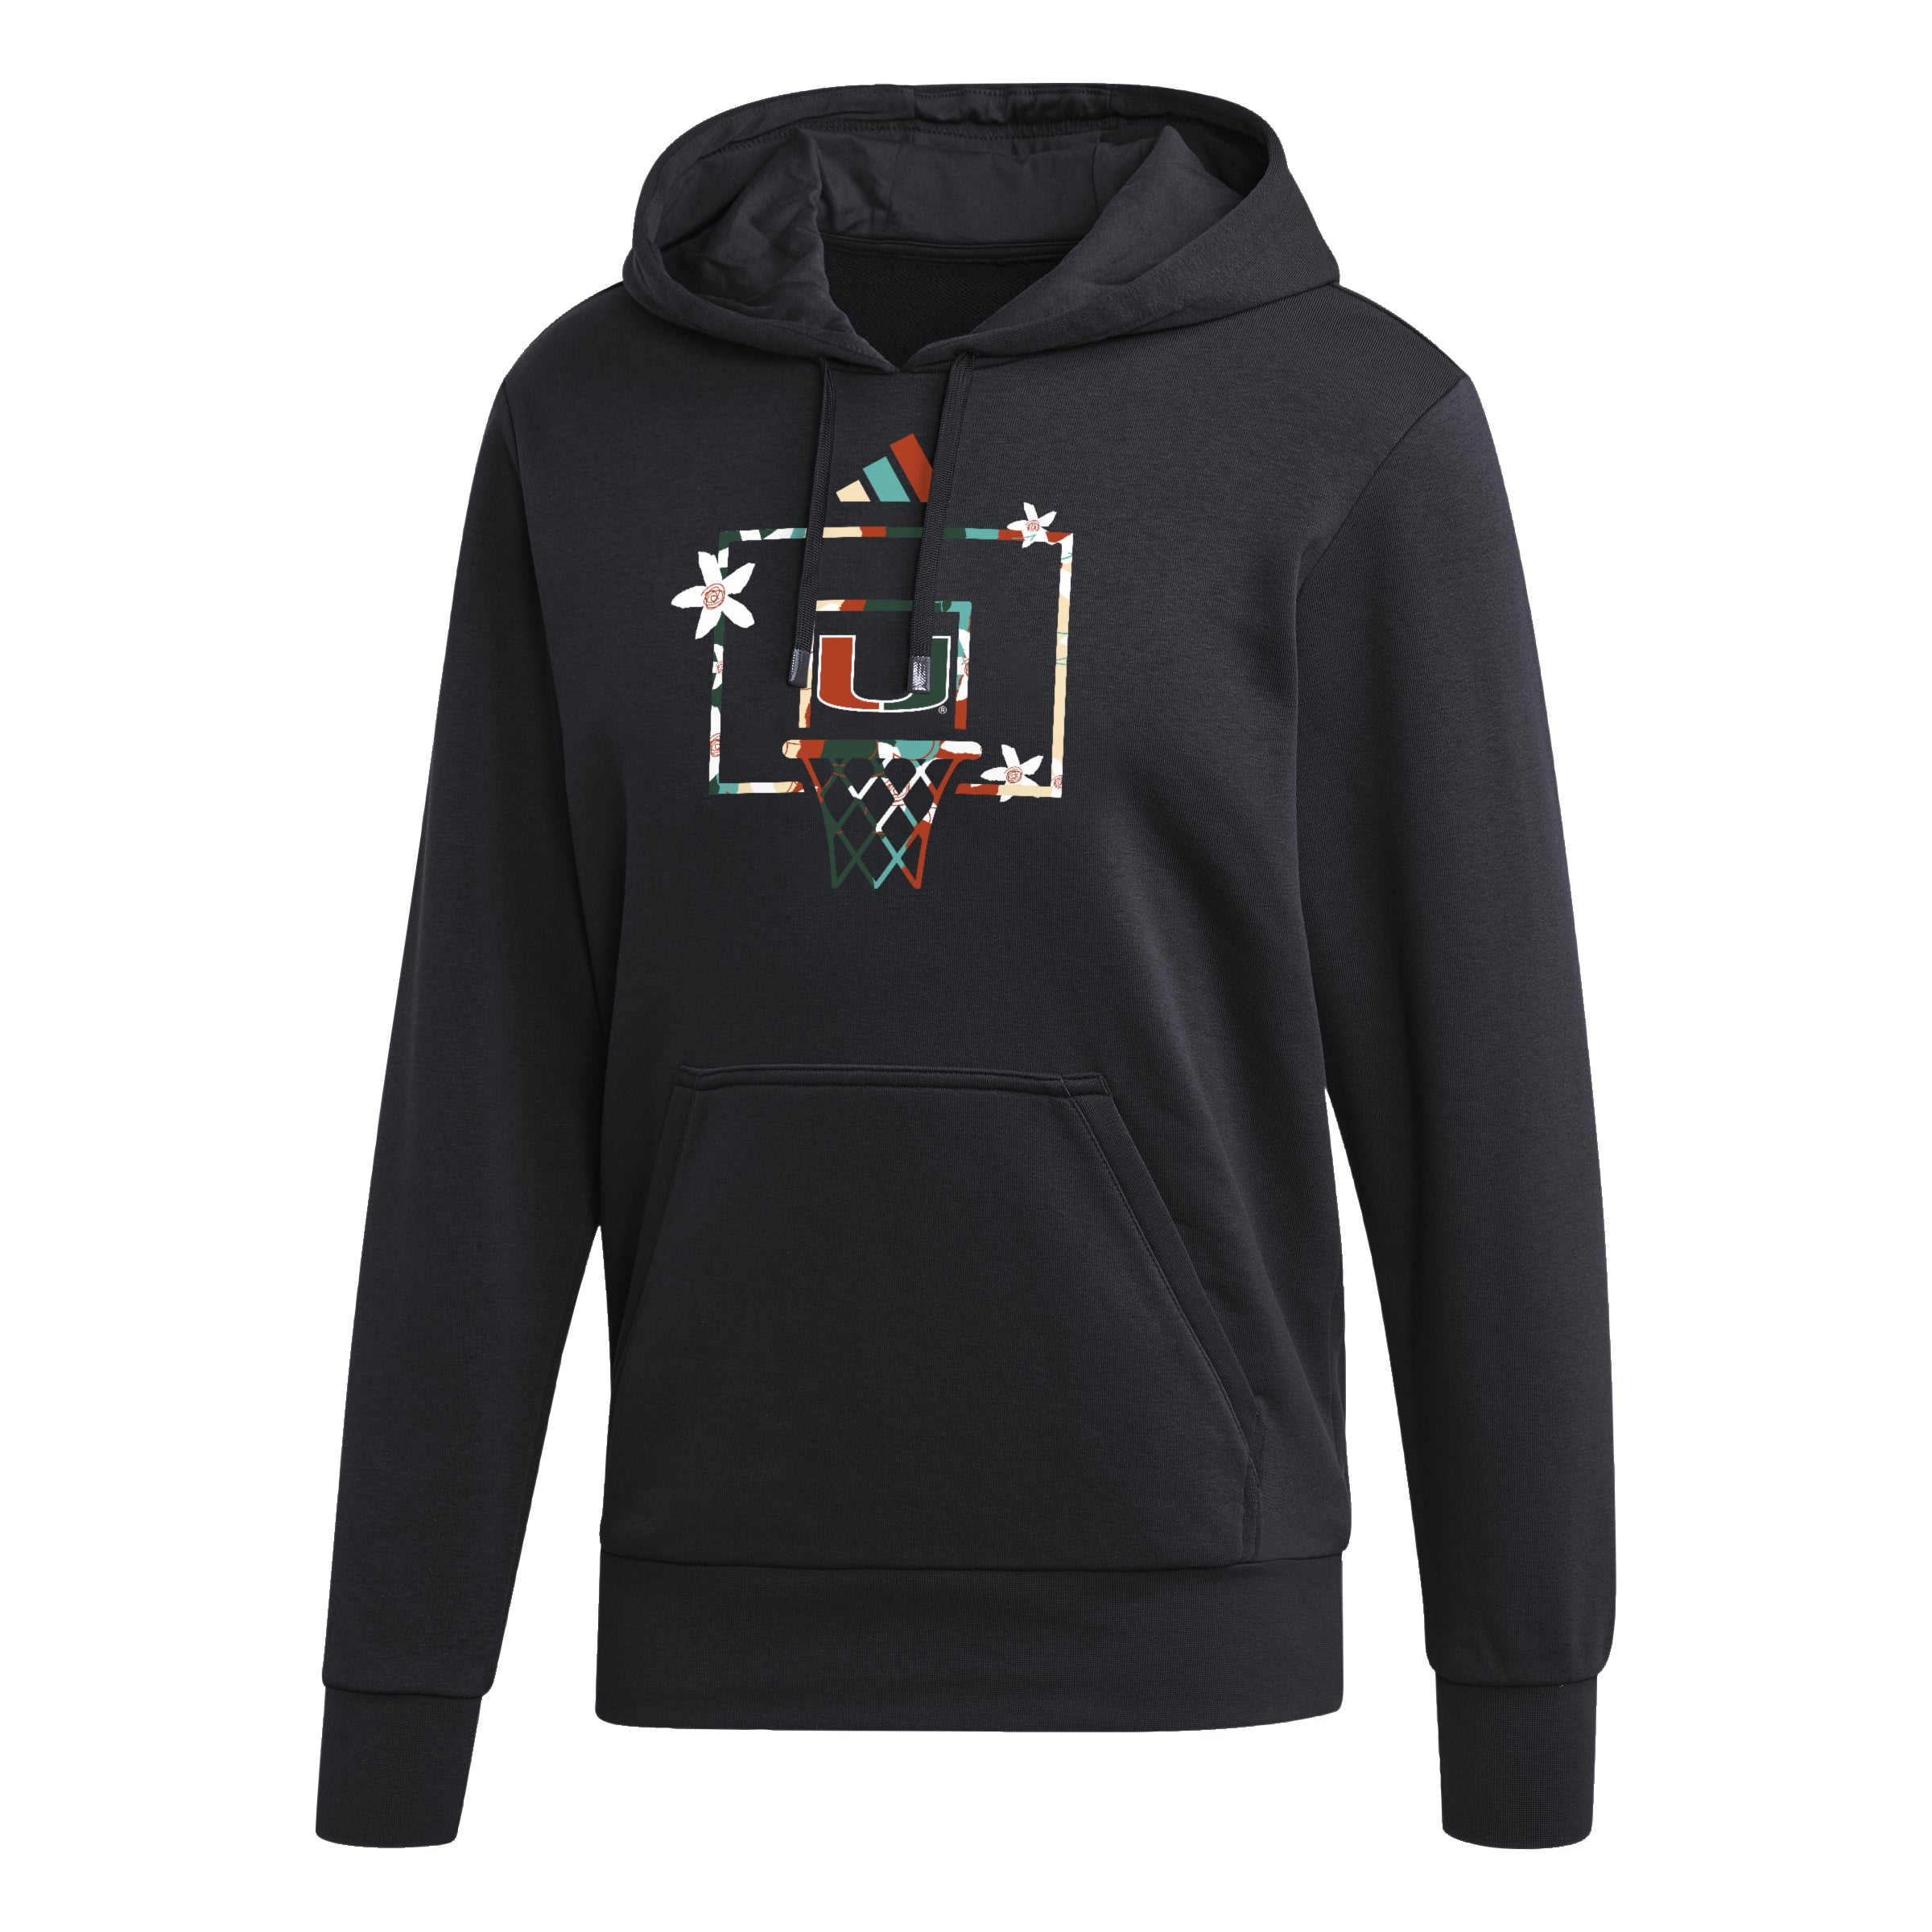 Miami Hurricanes adidas Honoring Black Excellence Pullover Hoodie - Black